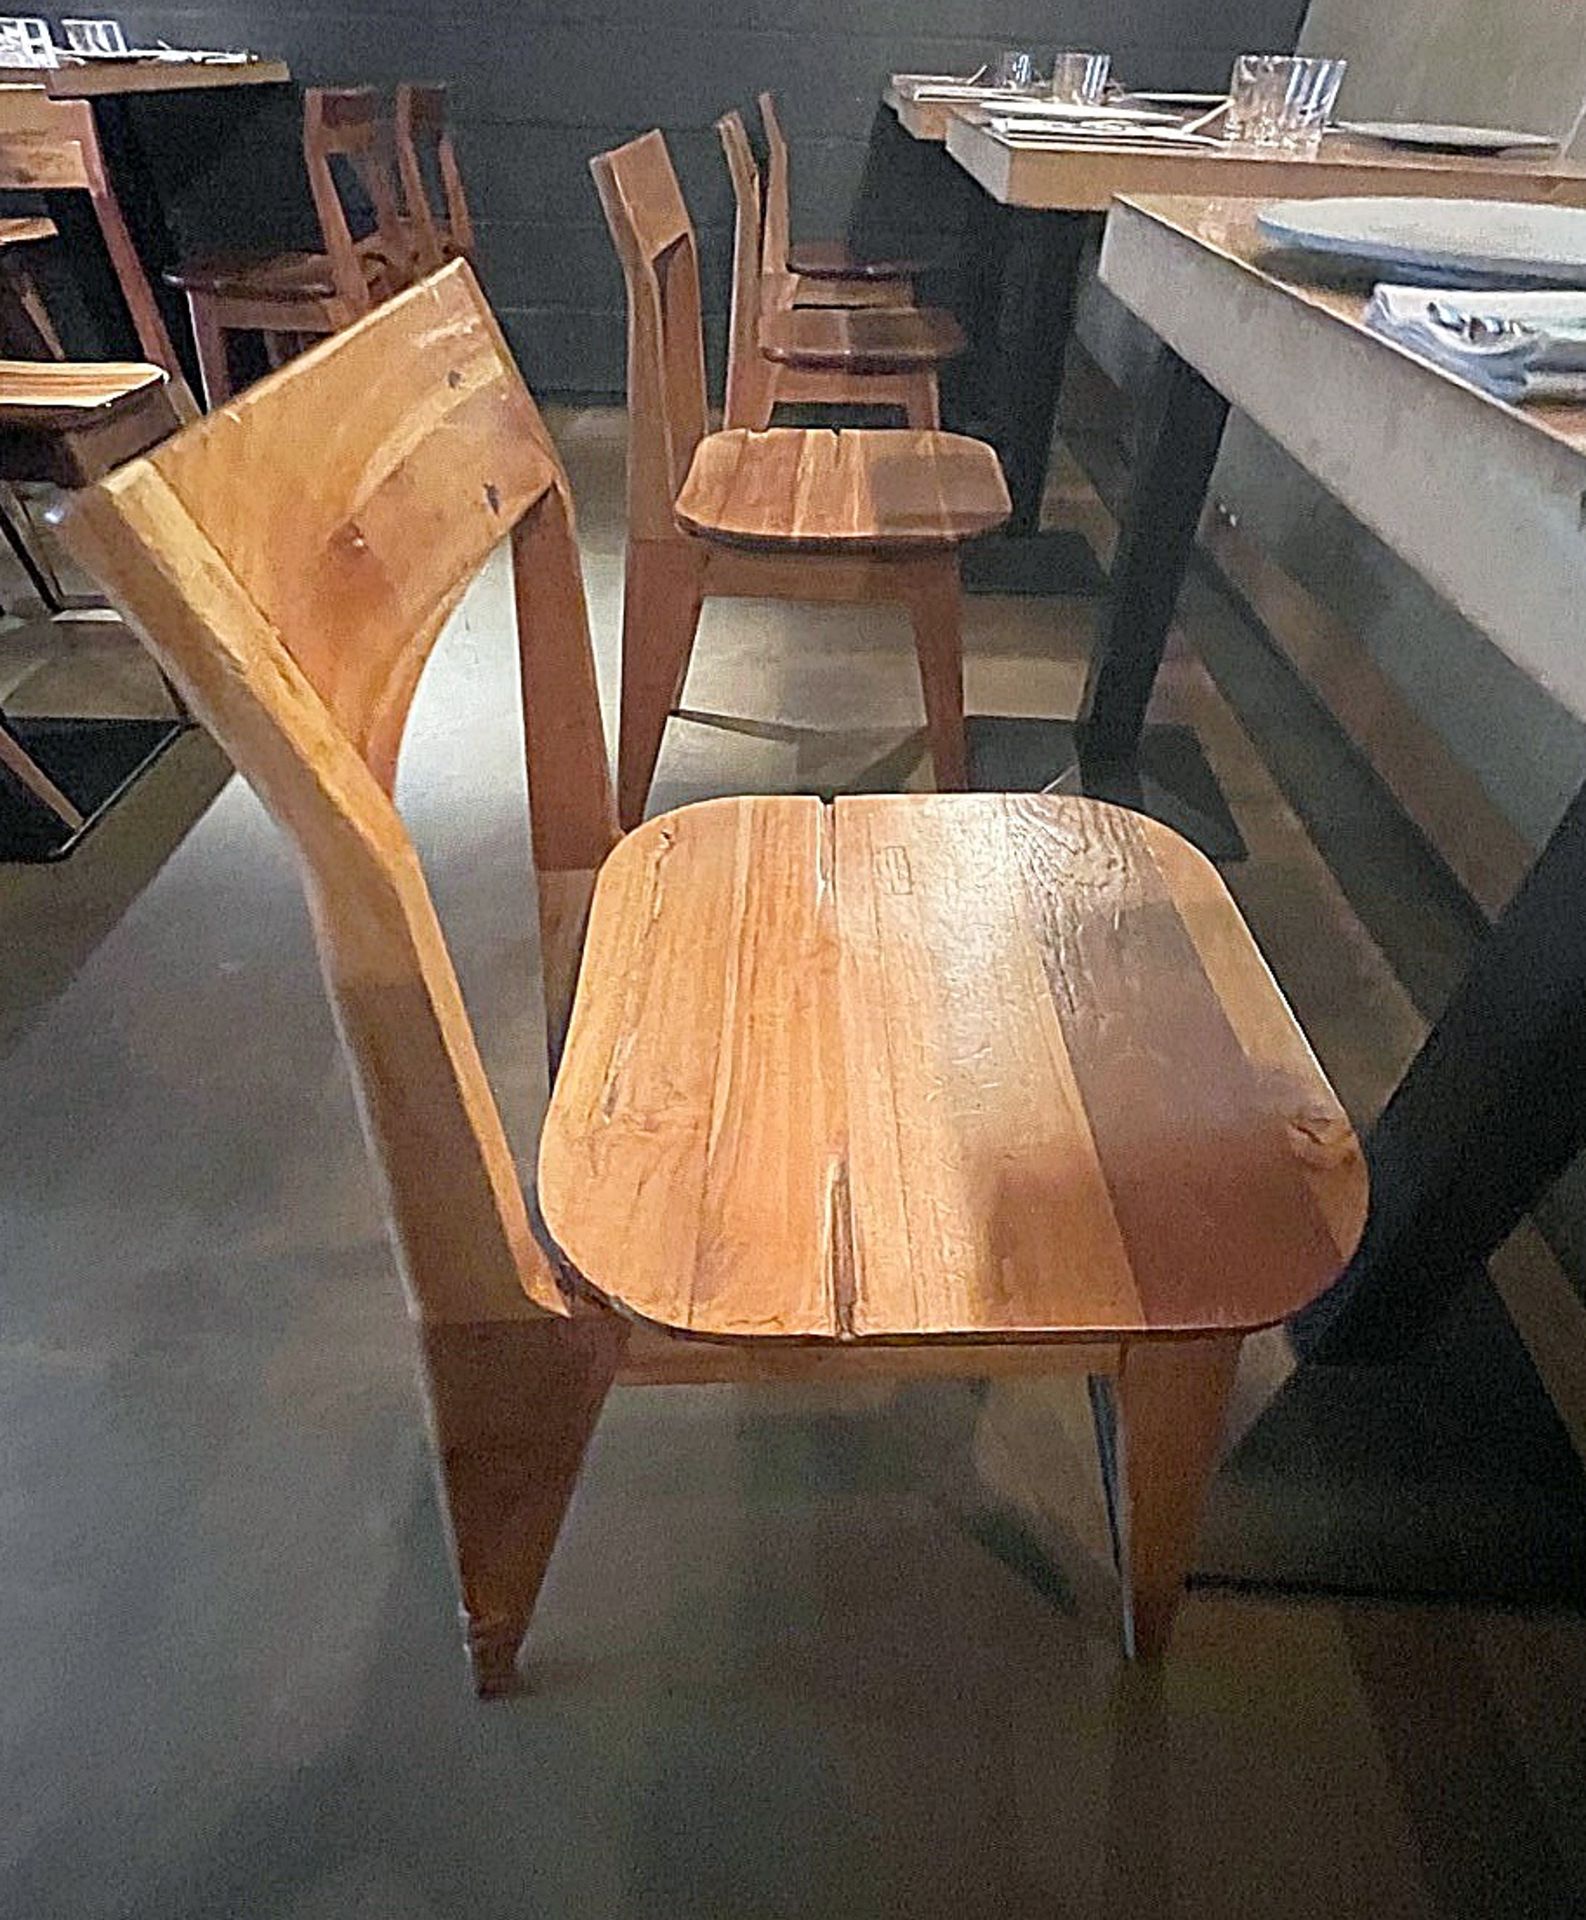 10 x Solid Wood Bistro Dining Chairs - Ref: MAN141 - CL677 - Location: London W1FThis item is to